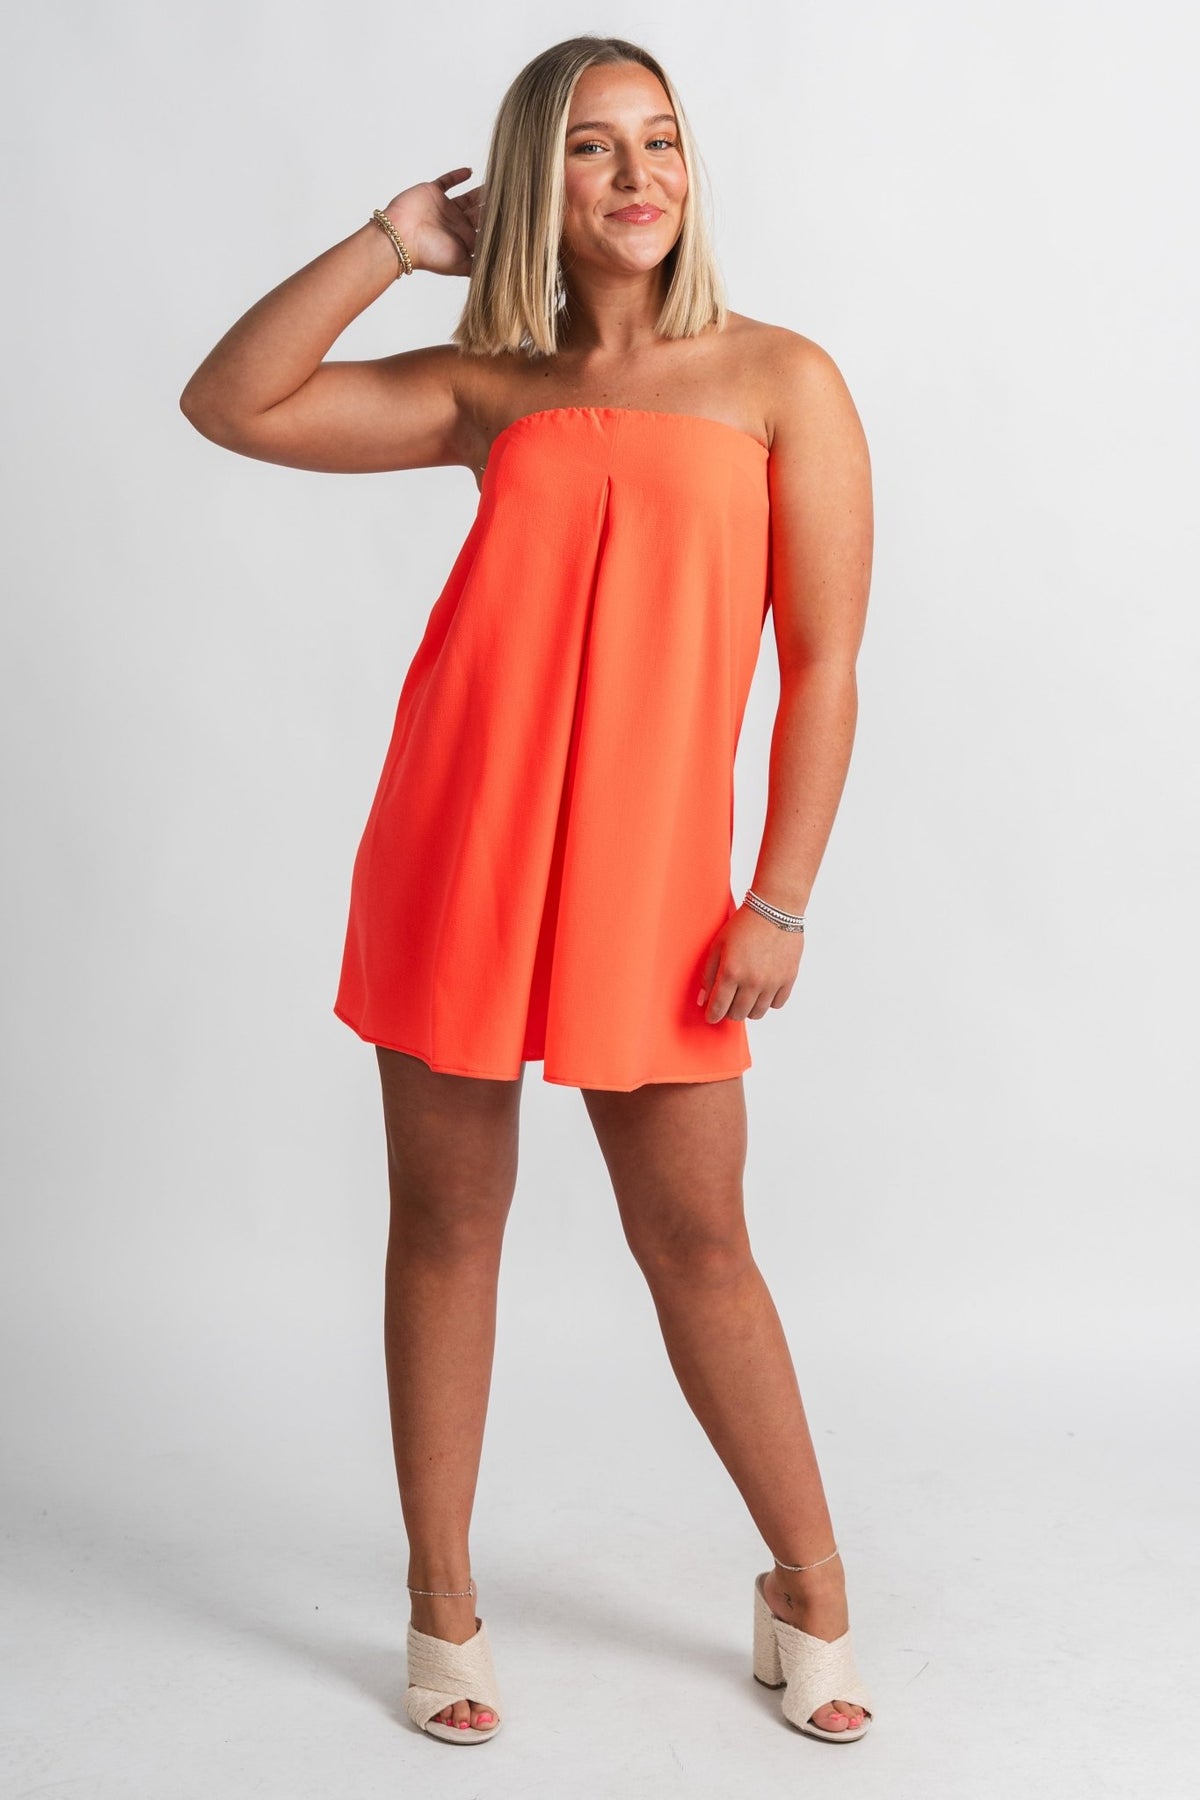 Strapless romper coral - Trendy Romper - Cute Vacation Collection at Lush Fashion Lounge Boutique in Oklahoma City